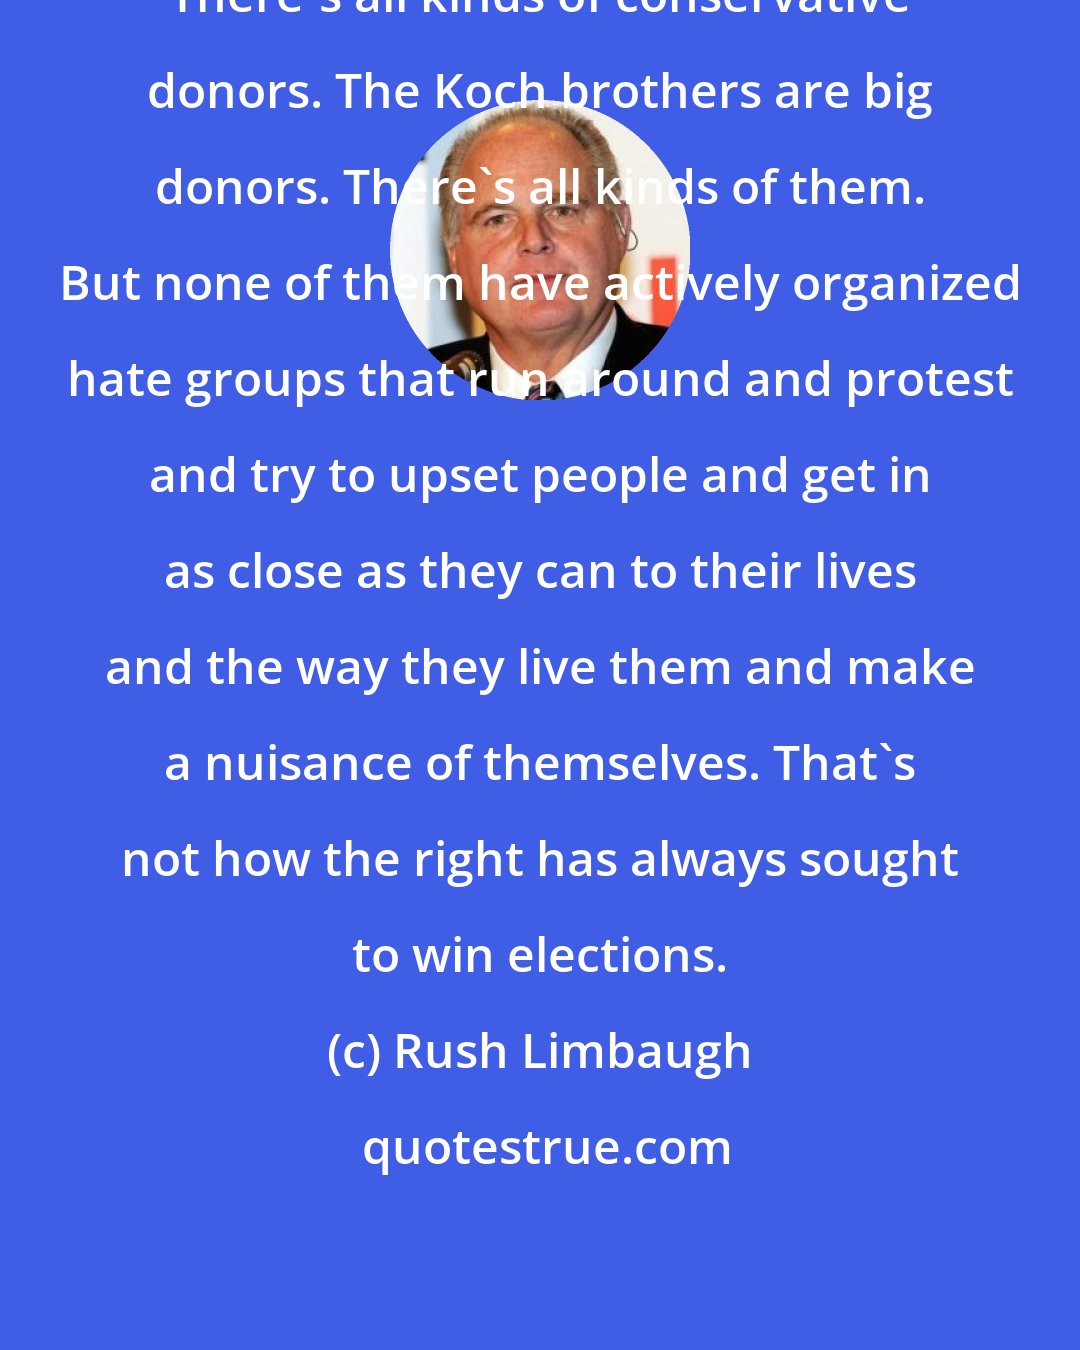 Rush Limbaugh: There's all kinds of conservative donors. The Koch brothers are big donors. There's all kinds of them. But none of them have actively organized hate groups that run around and protest and try to upset people and get in as close as they can to their lives and the way they live them and make a nuisance of themselves. That's not how the right has always sought to win elections.